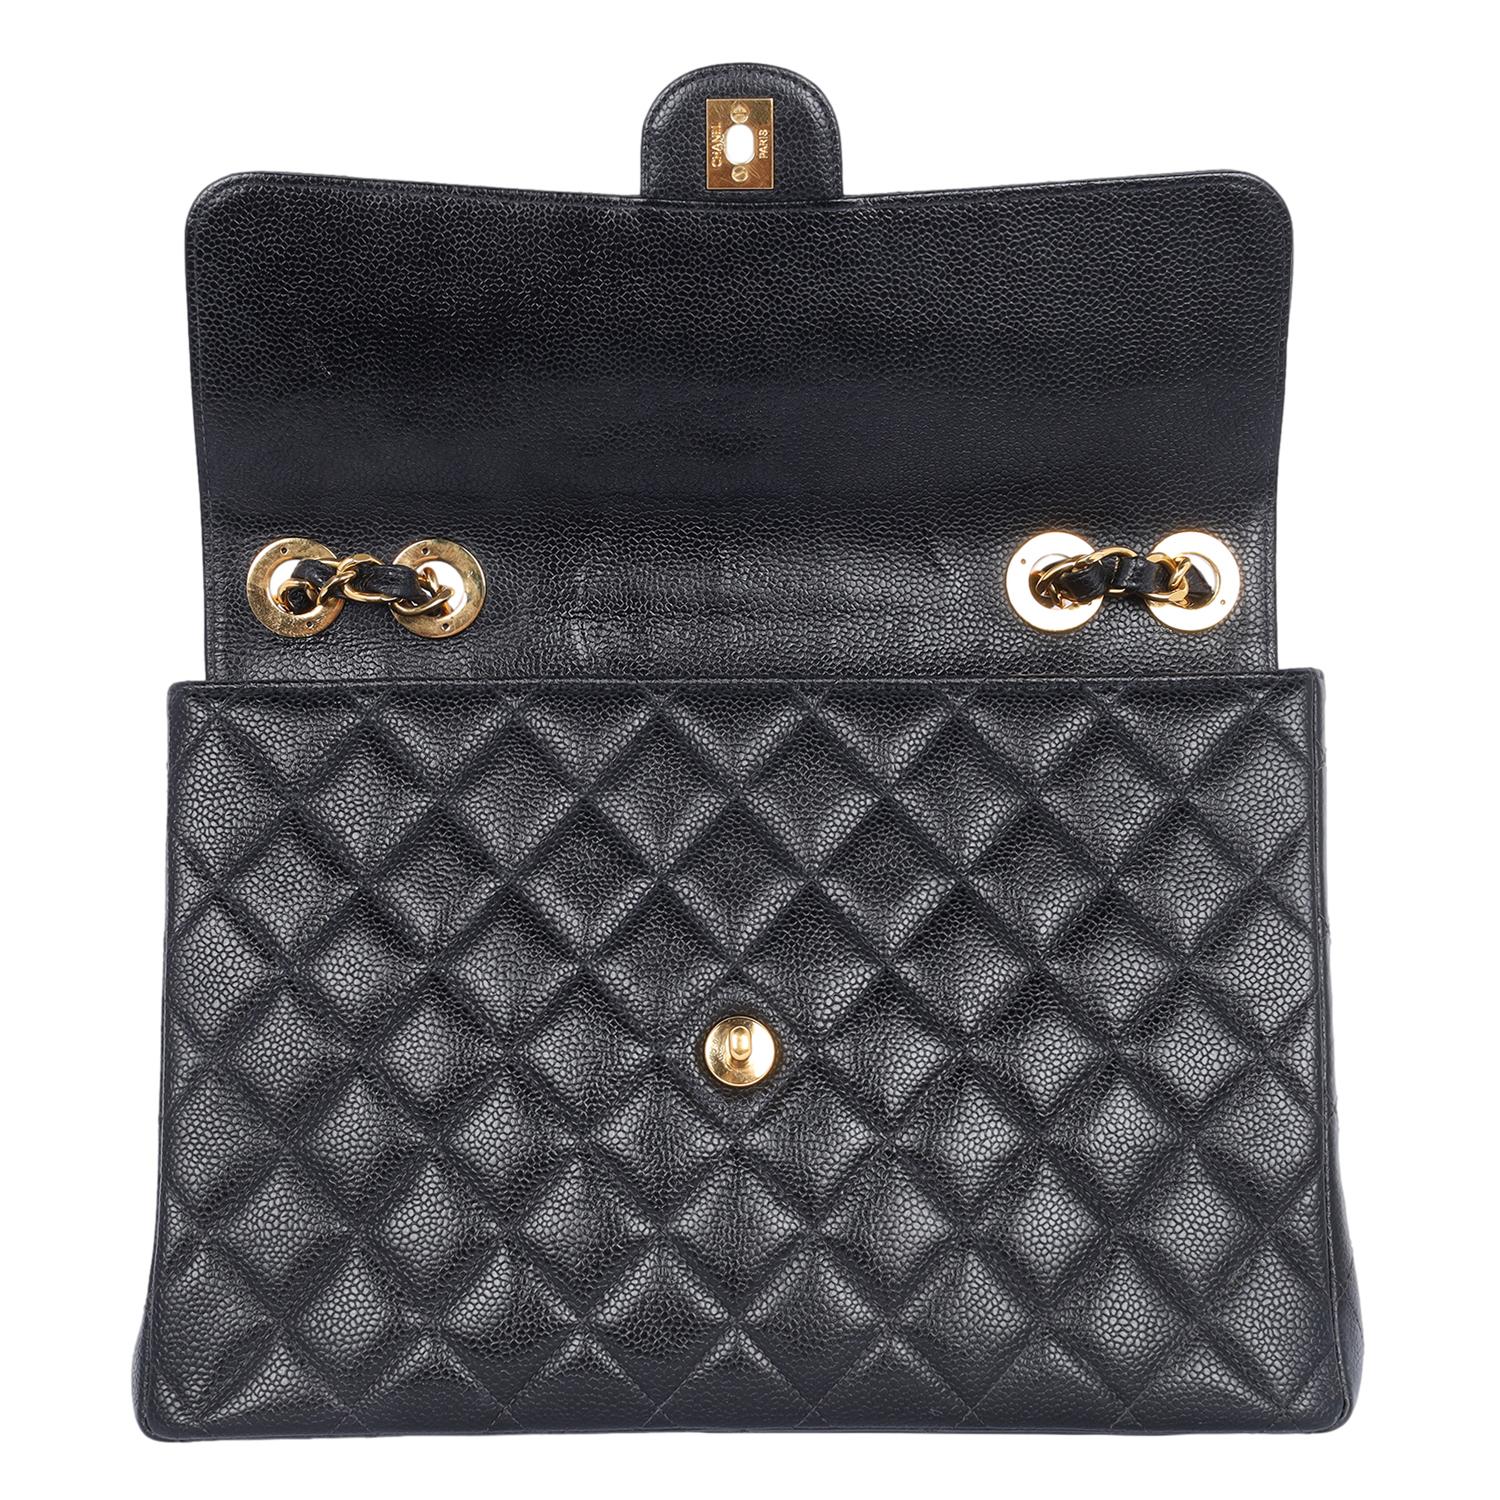 Chanel CC Quilted Jumbo Classic Classic Leather Flap Bag en vente 5